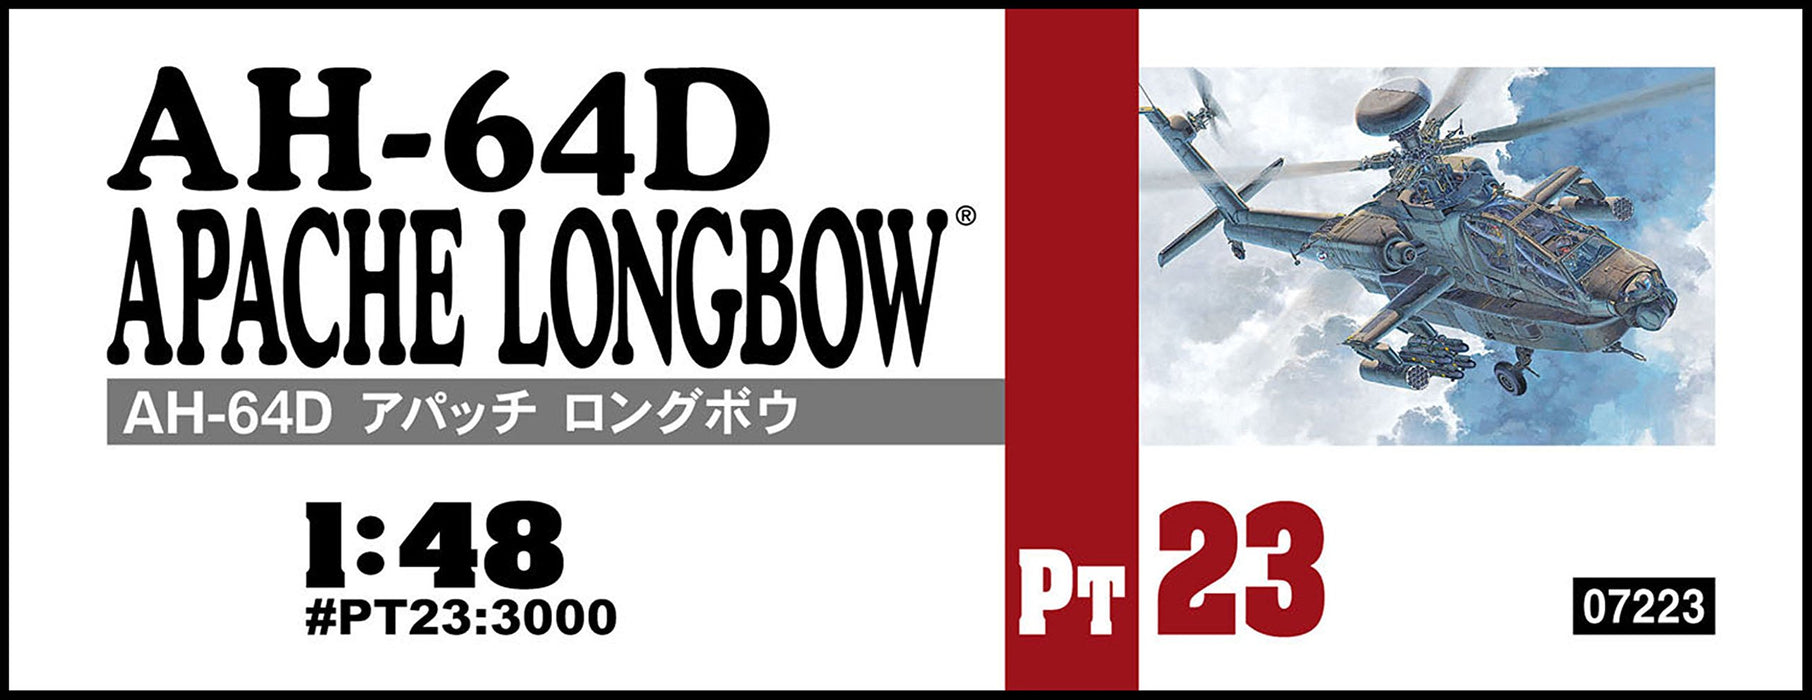 HASEGAWA 1/48 Ah-64D Apache Longbow U.S. Army Attack Helicopter Plastic Model